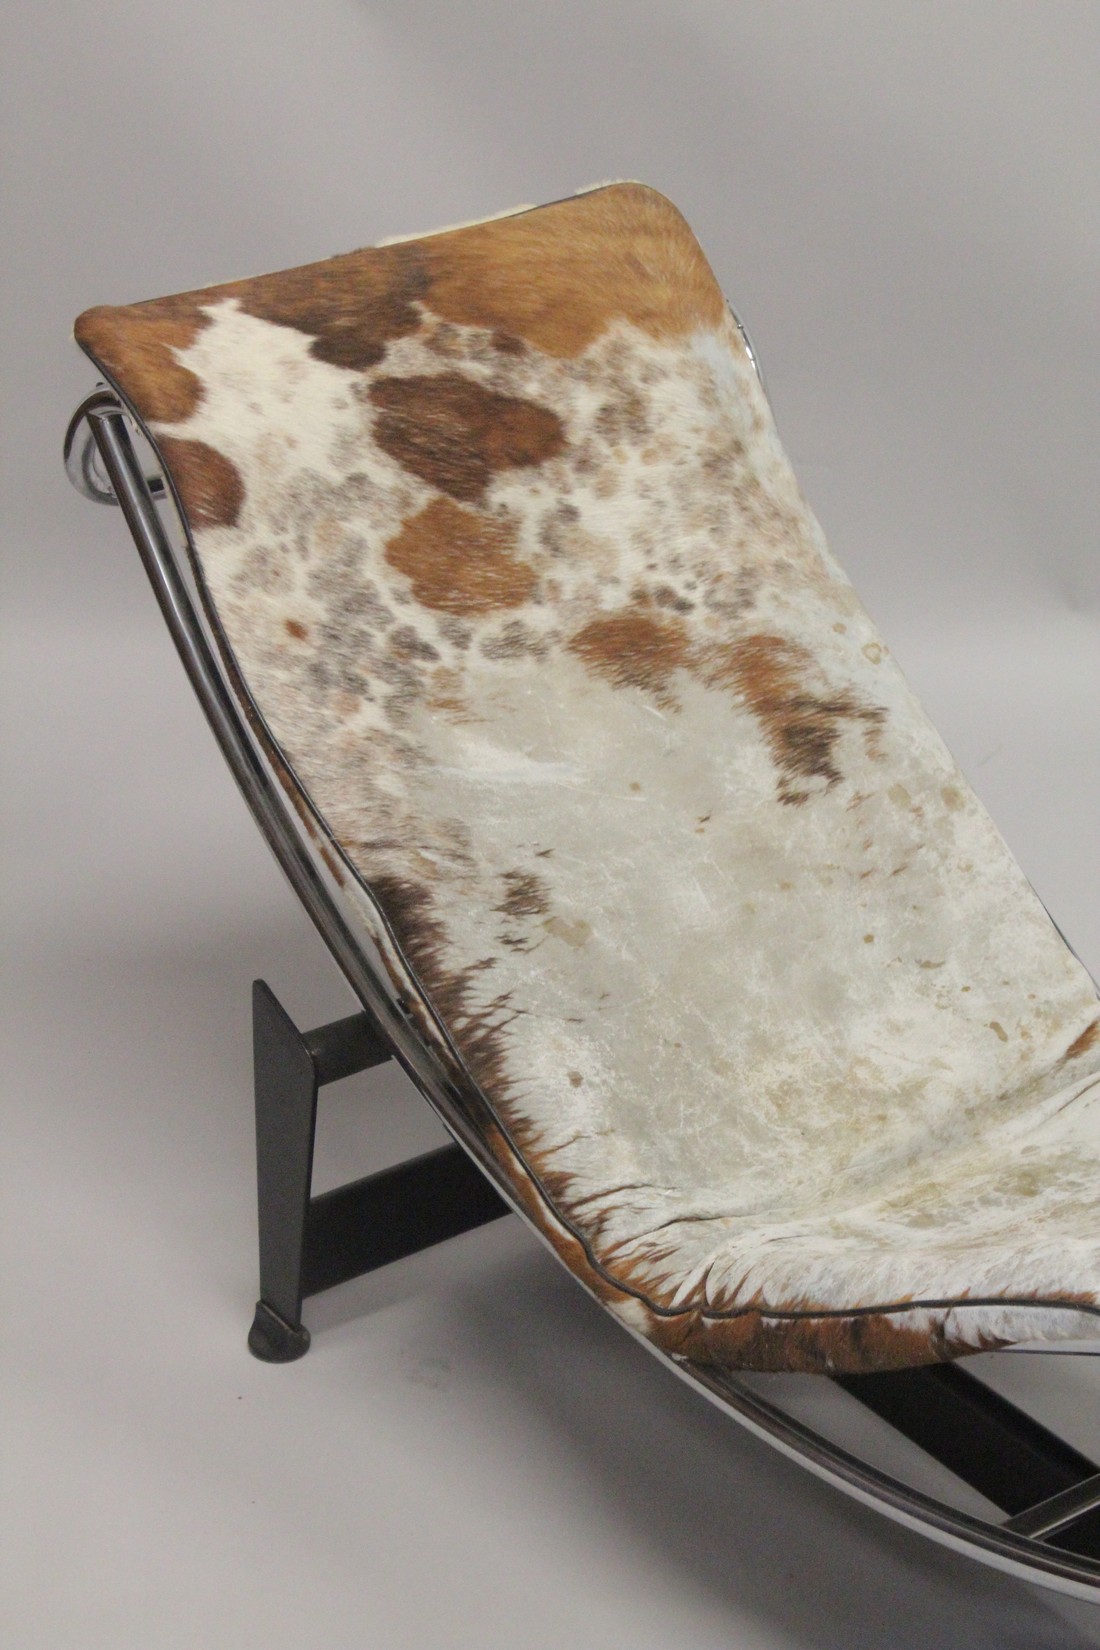 A CHARLOTTE PERRIAND, LE CORBUSIER STYLE CHAISE LONGUE, upholstered in cow hide. - Image 2 of 4